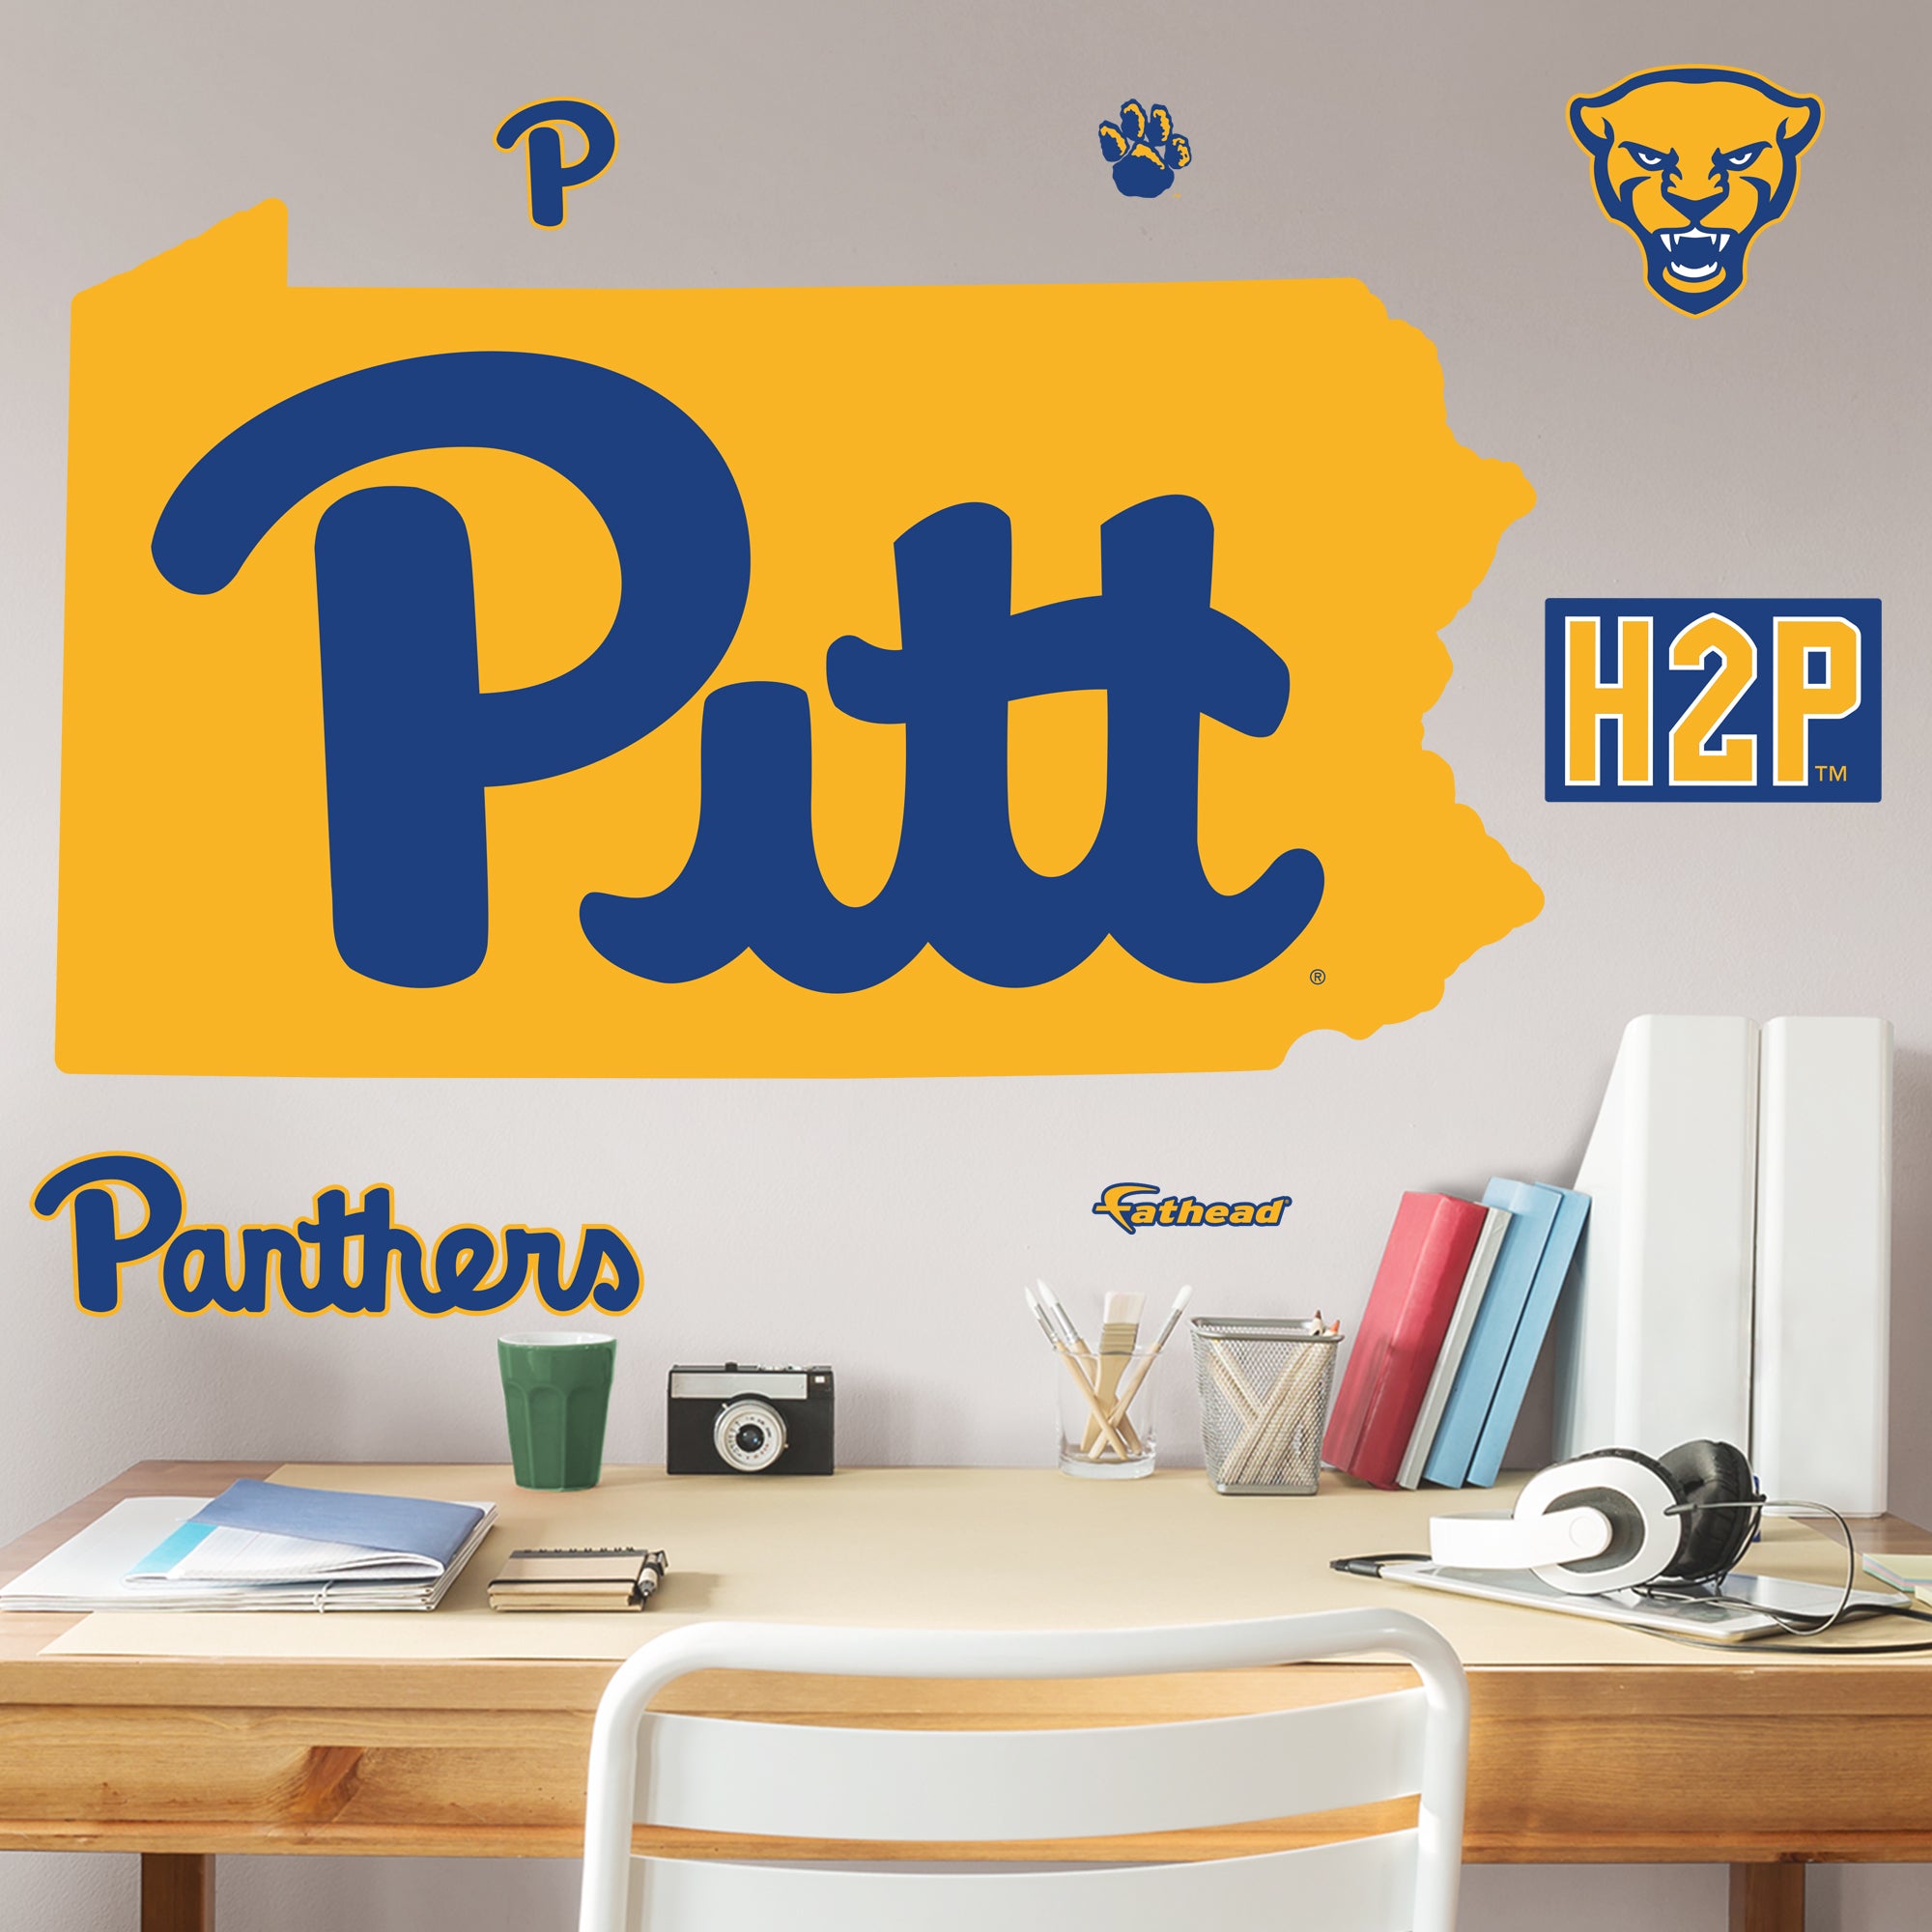 Pittsburgh Panthers: State of Pennsylvania - Officially Licensed Removable Wall Decal Giant Logo by Fathead | Vinyl